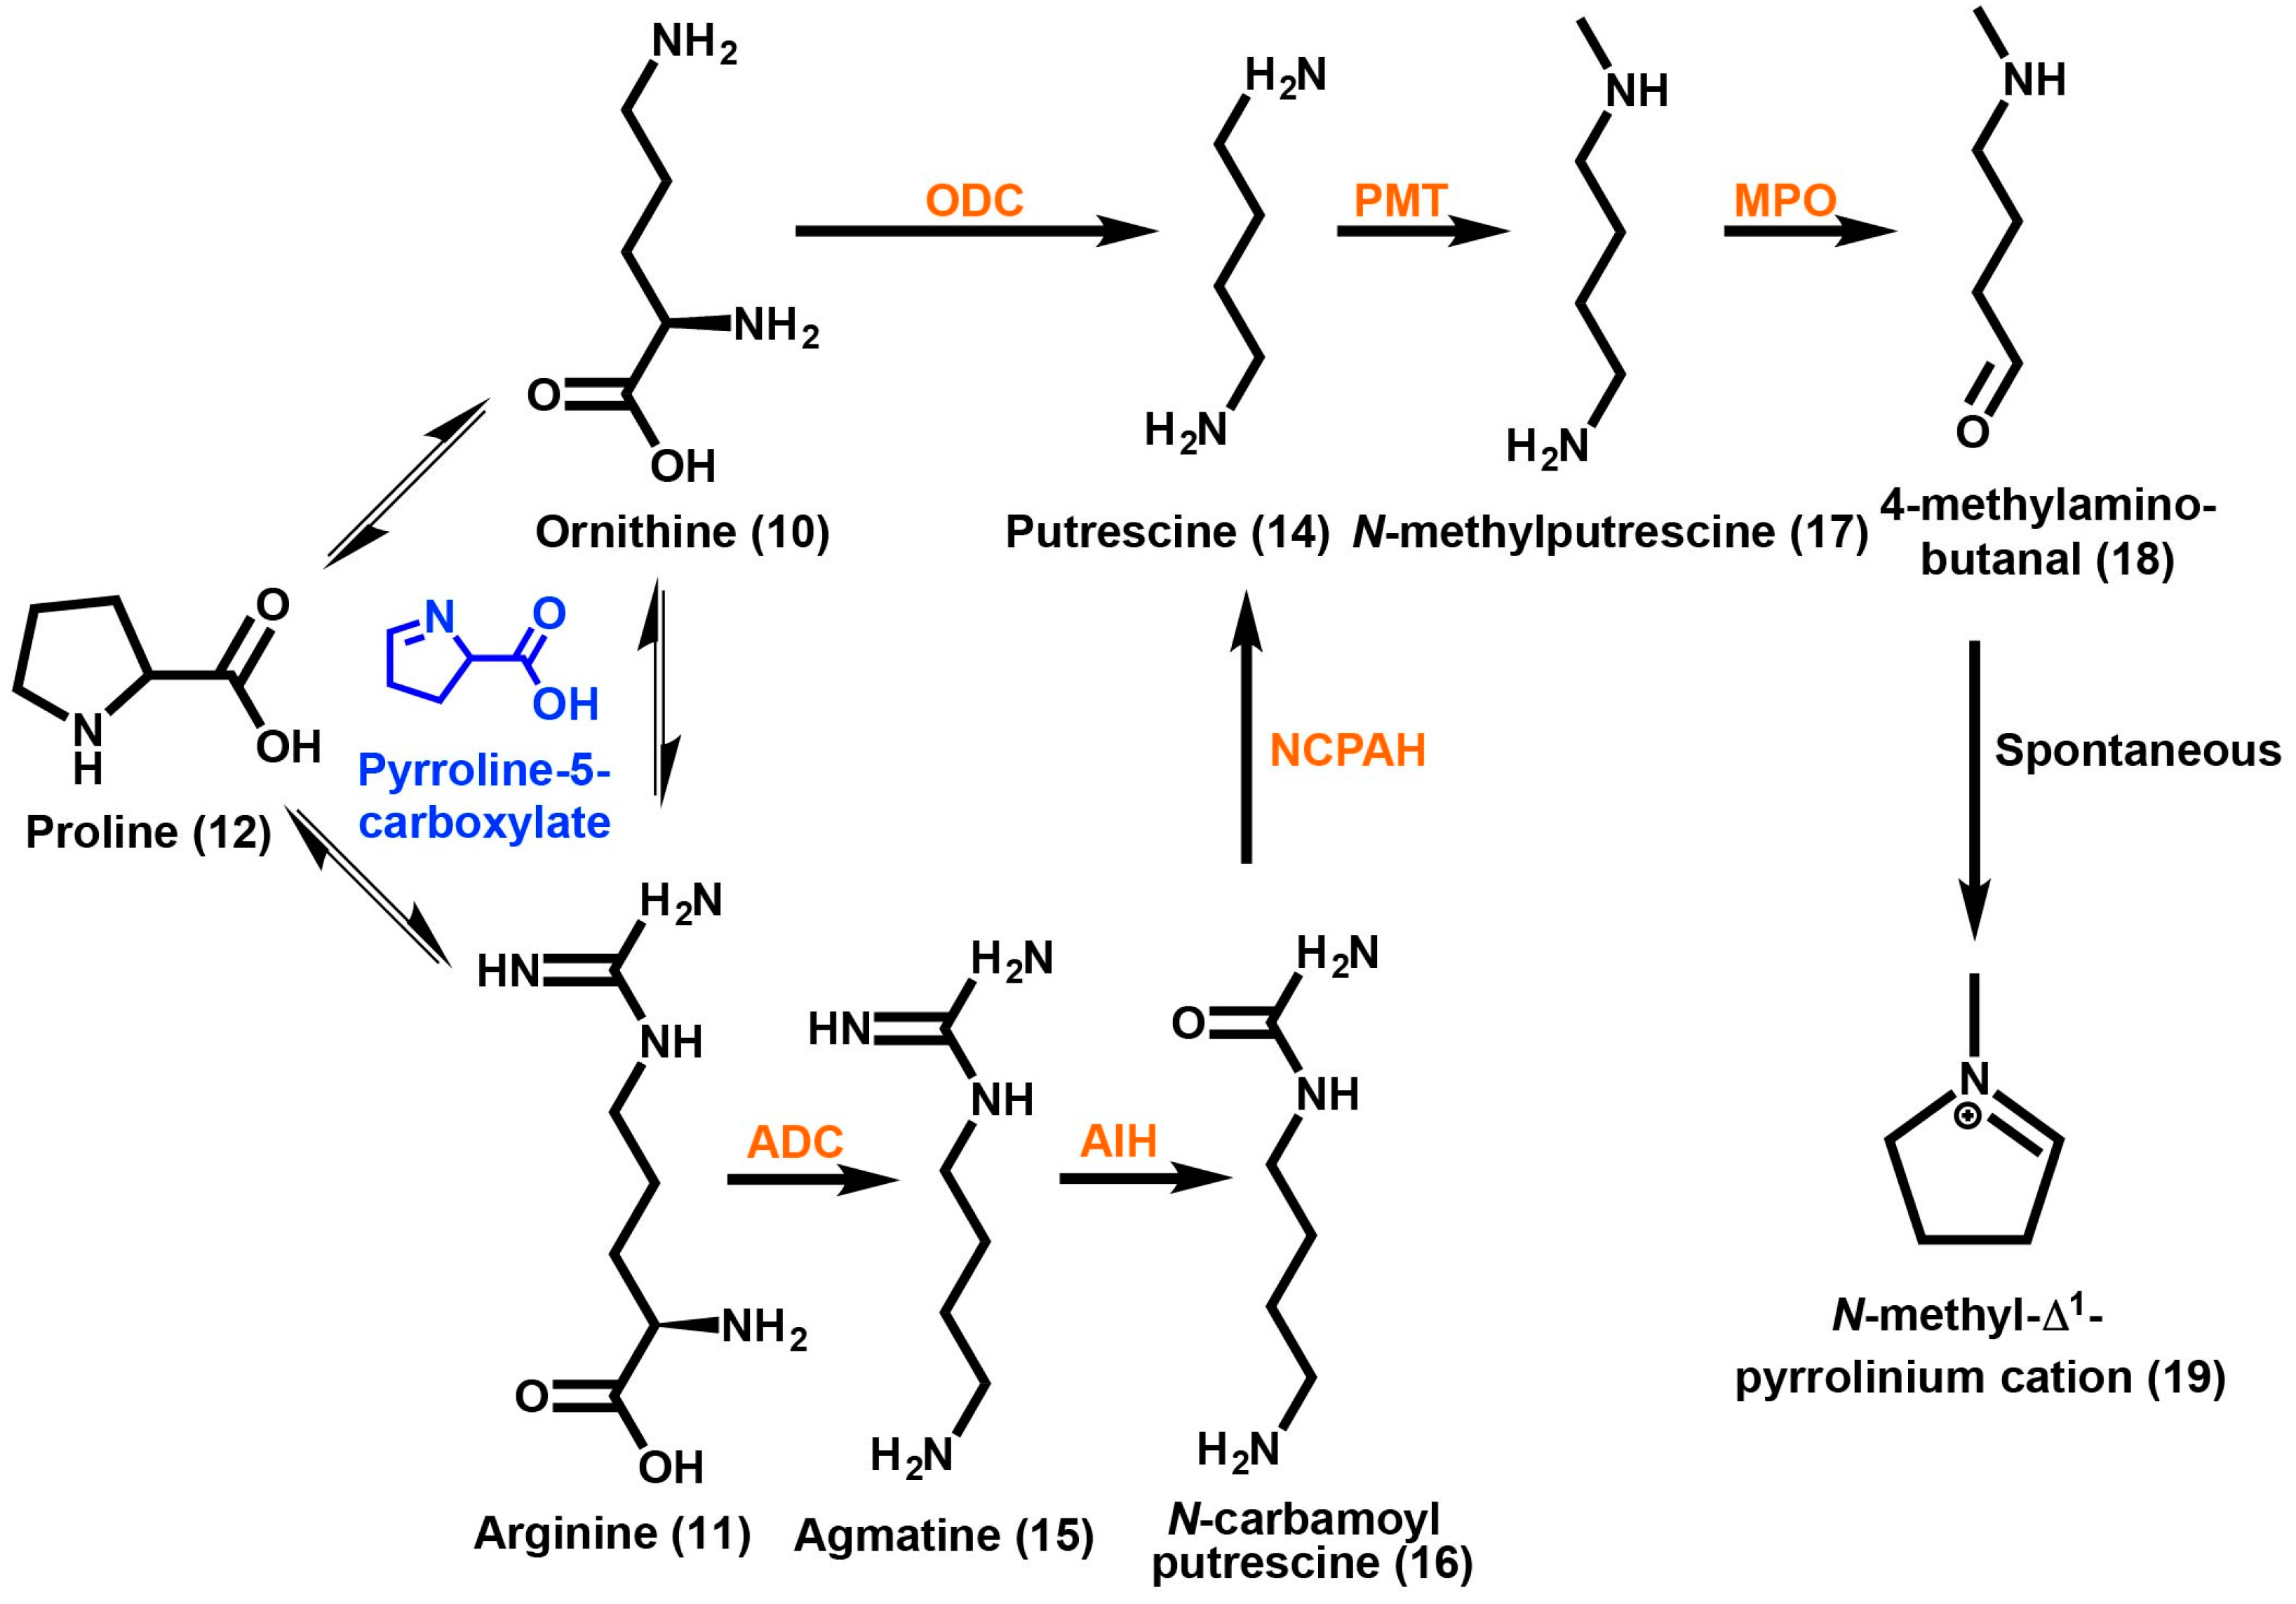 Discovery and Engineering of the Cocaine Biosynthetic Pathway